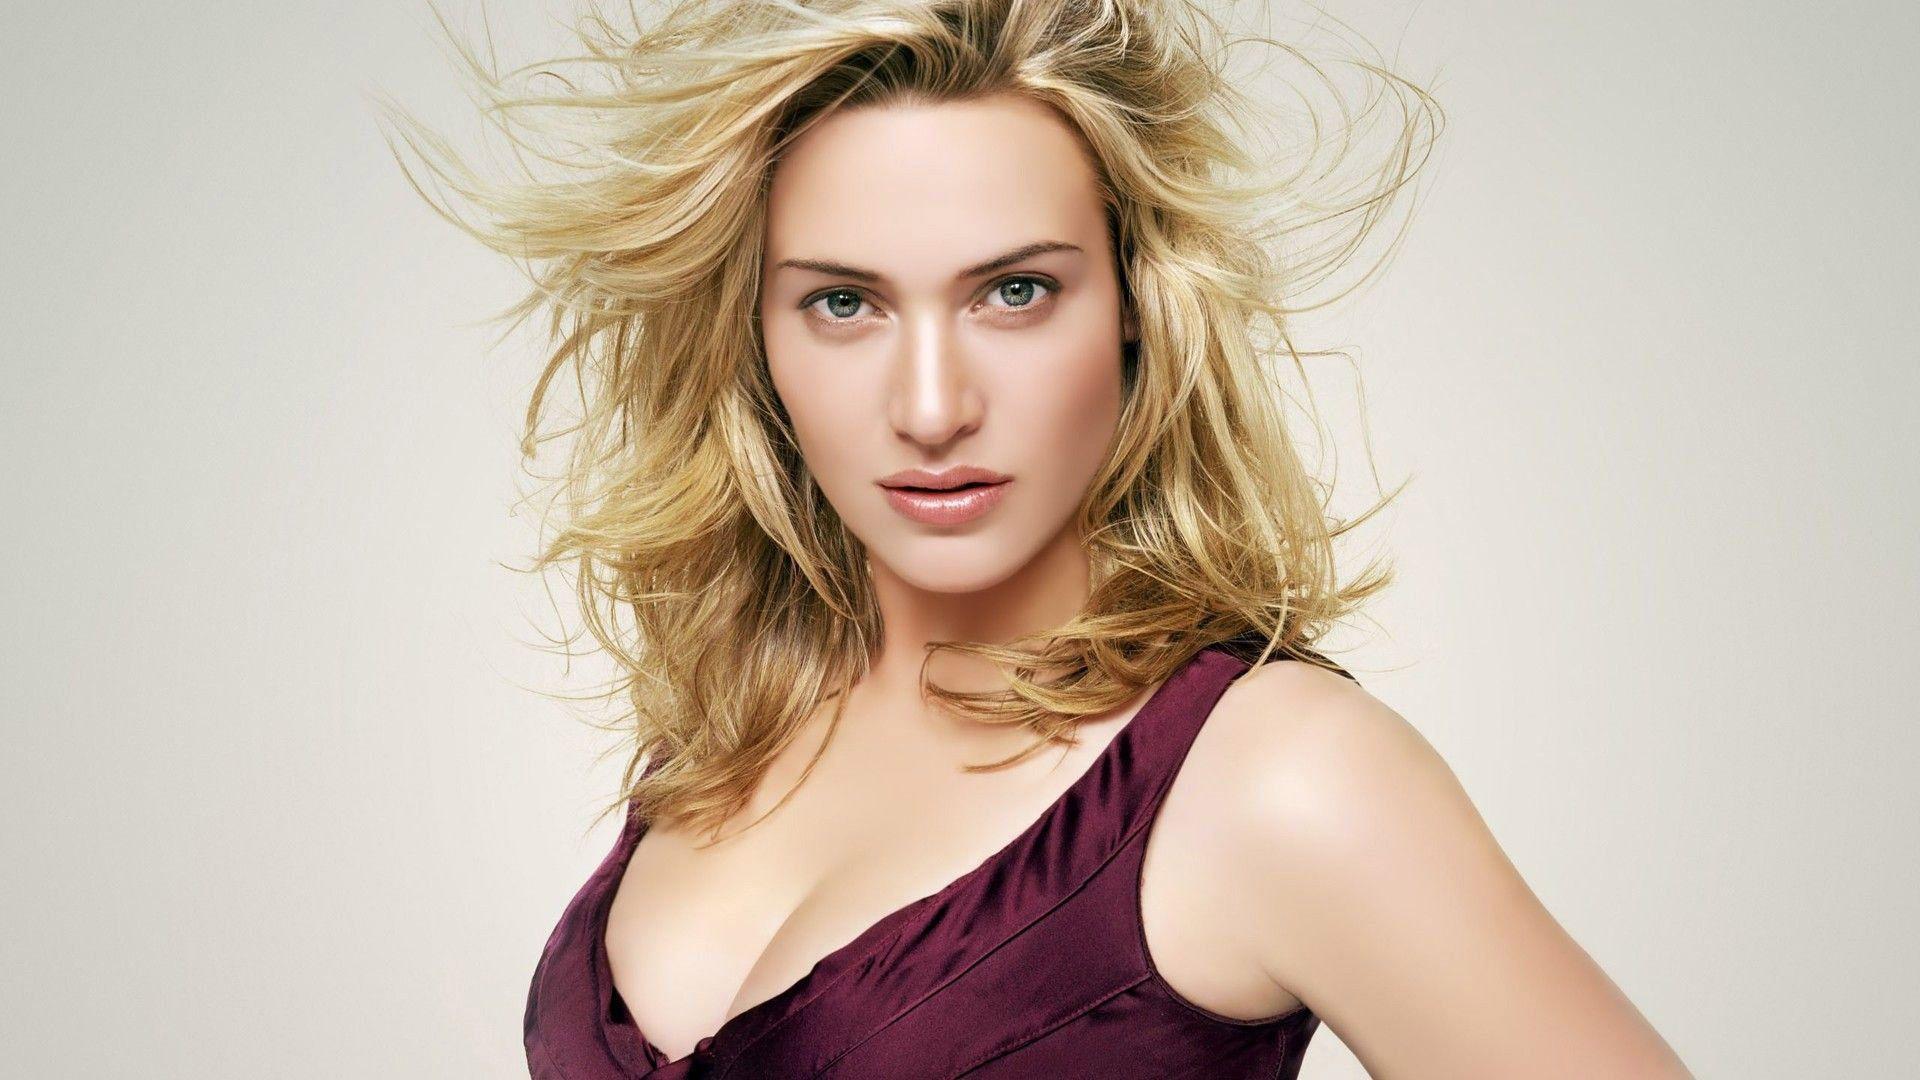 Kate Winslet Wallpapers Image Photos Pictures Backgrounds